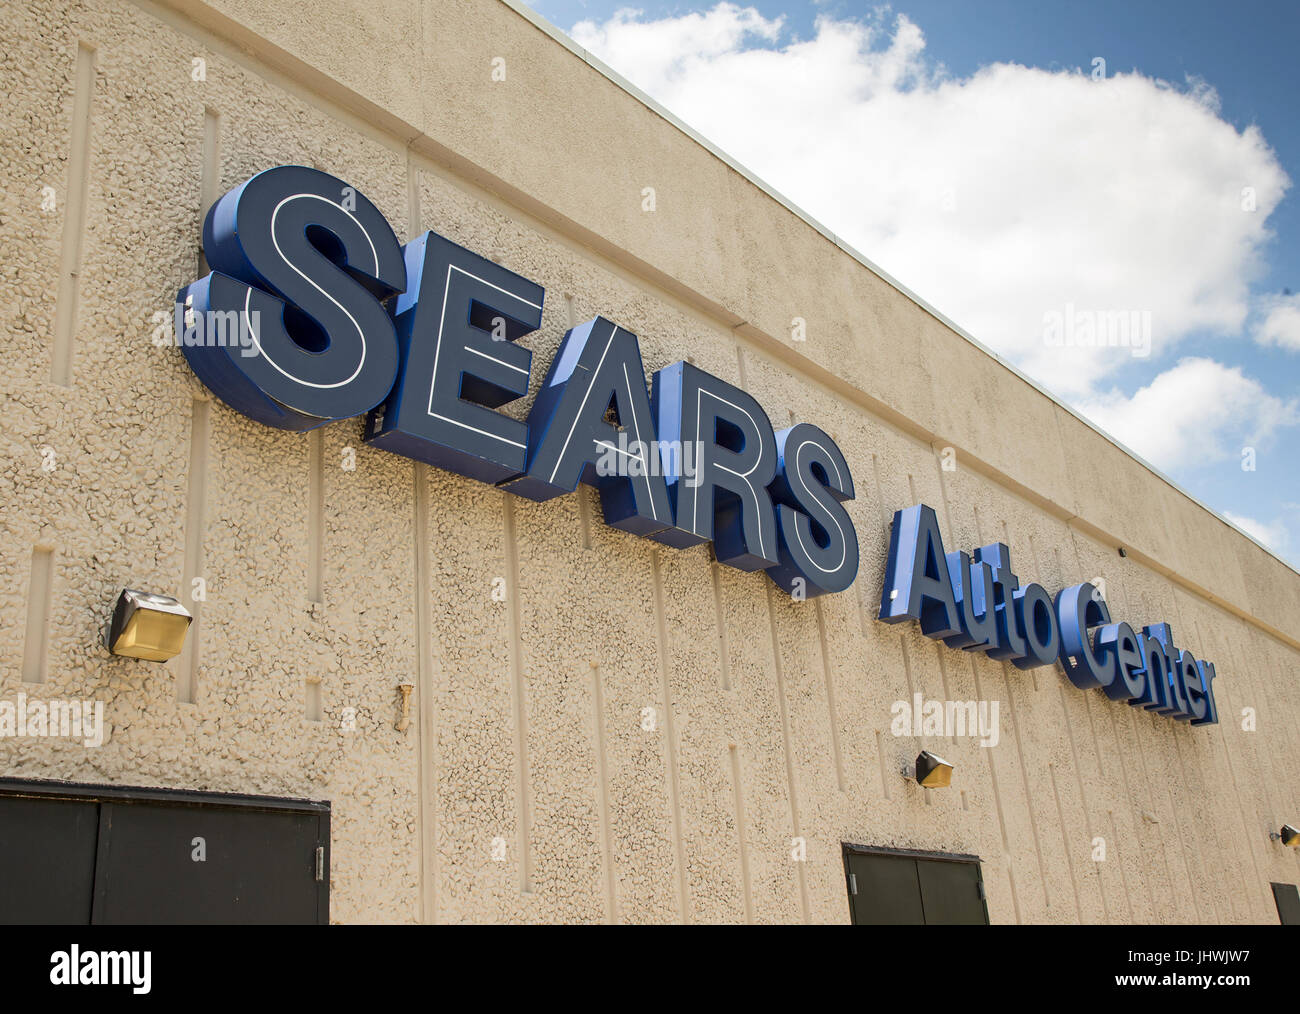 Sign above a Sears Auto Center in New Jersey Stock Photo